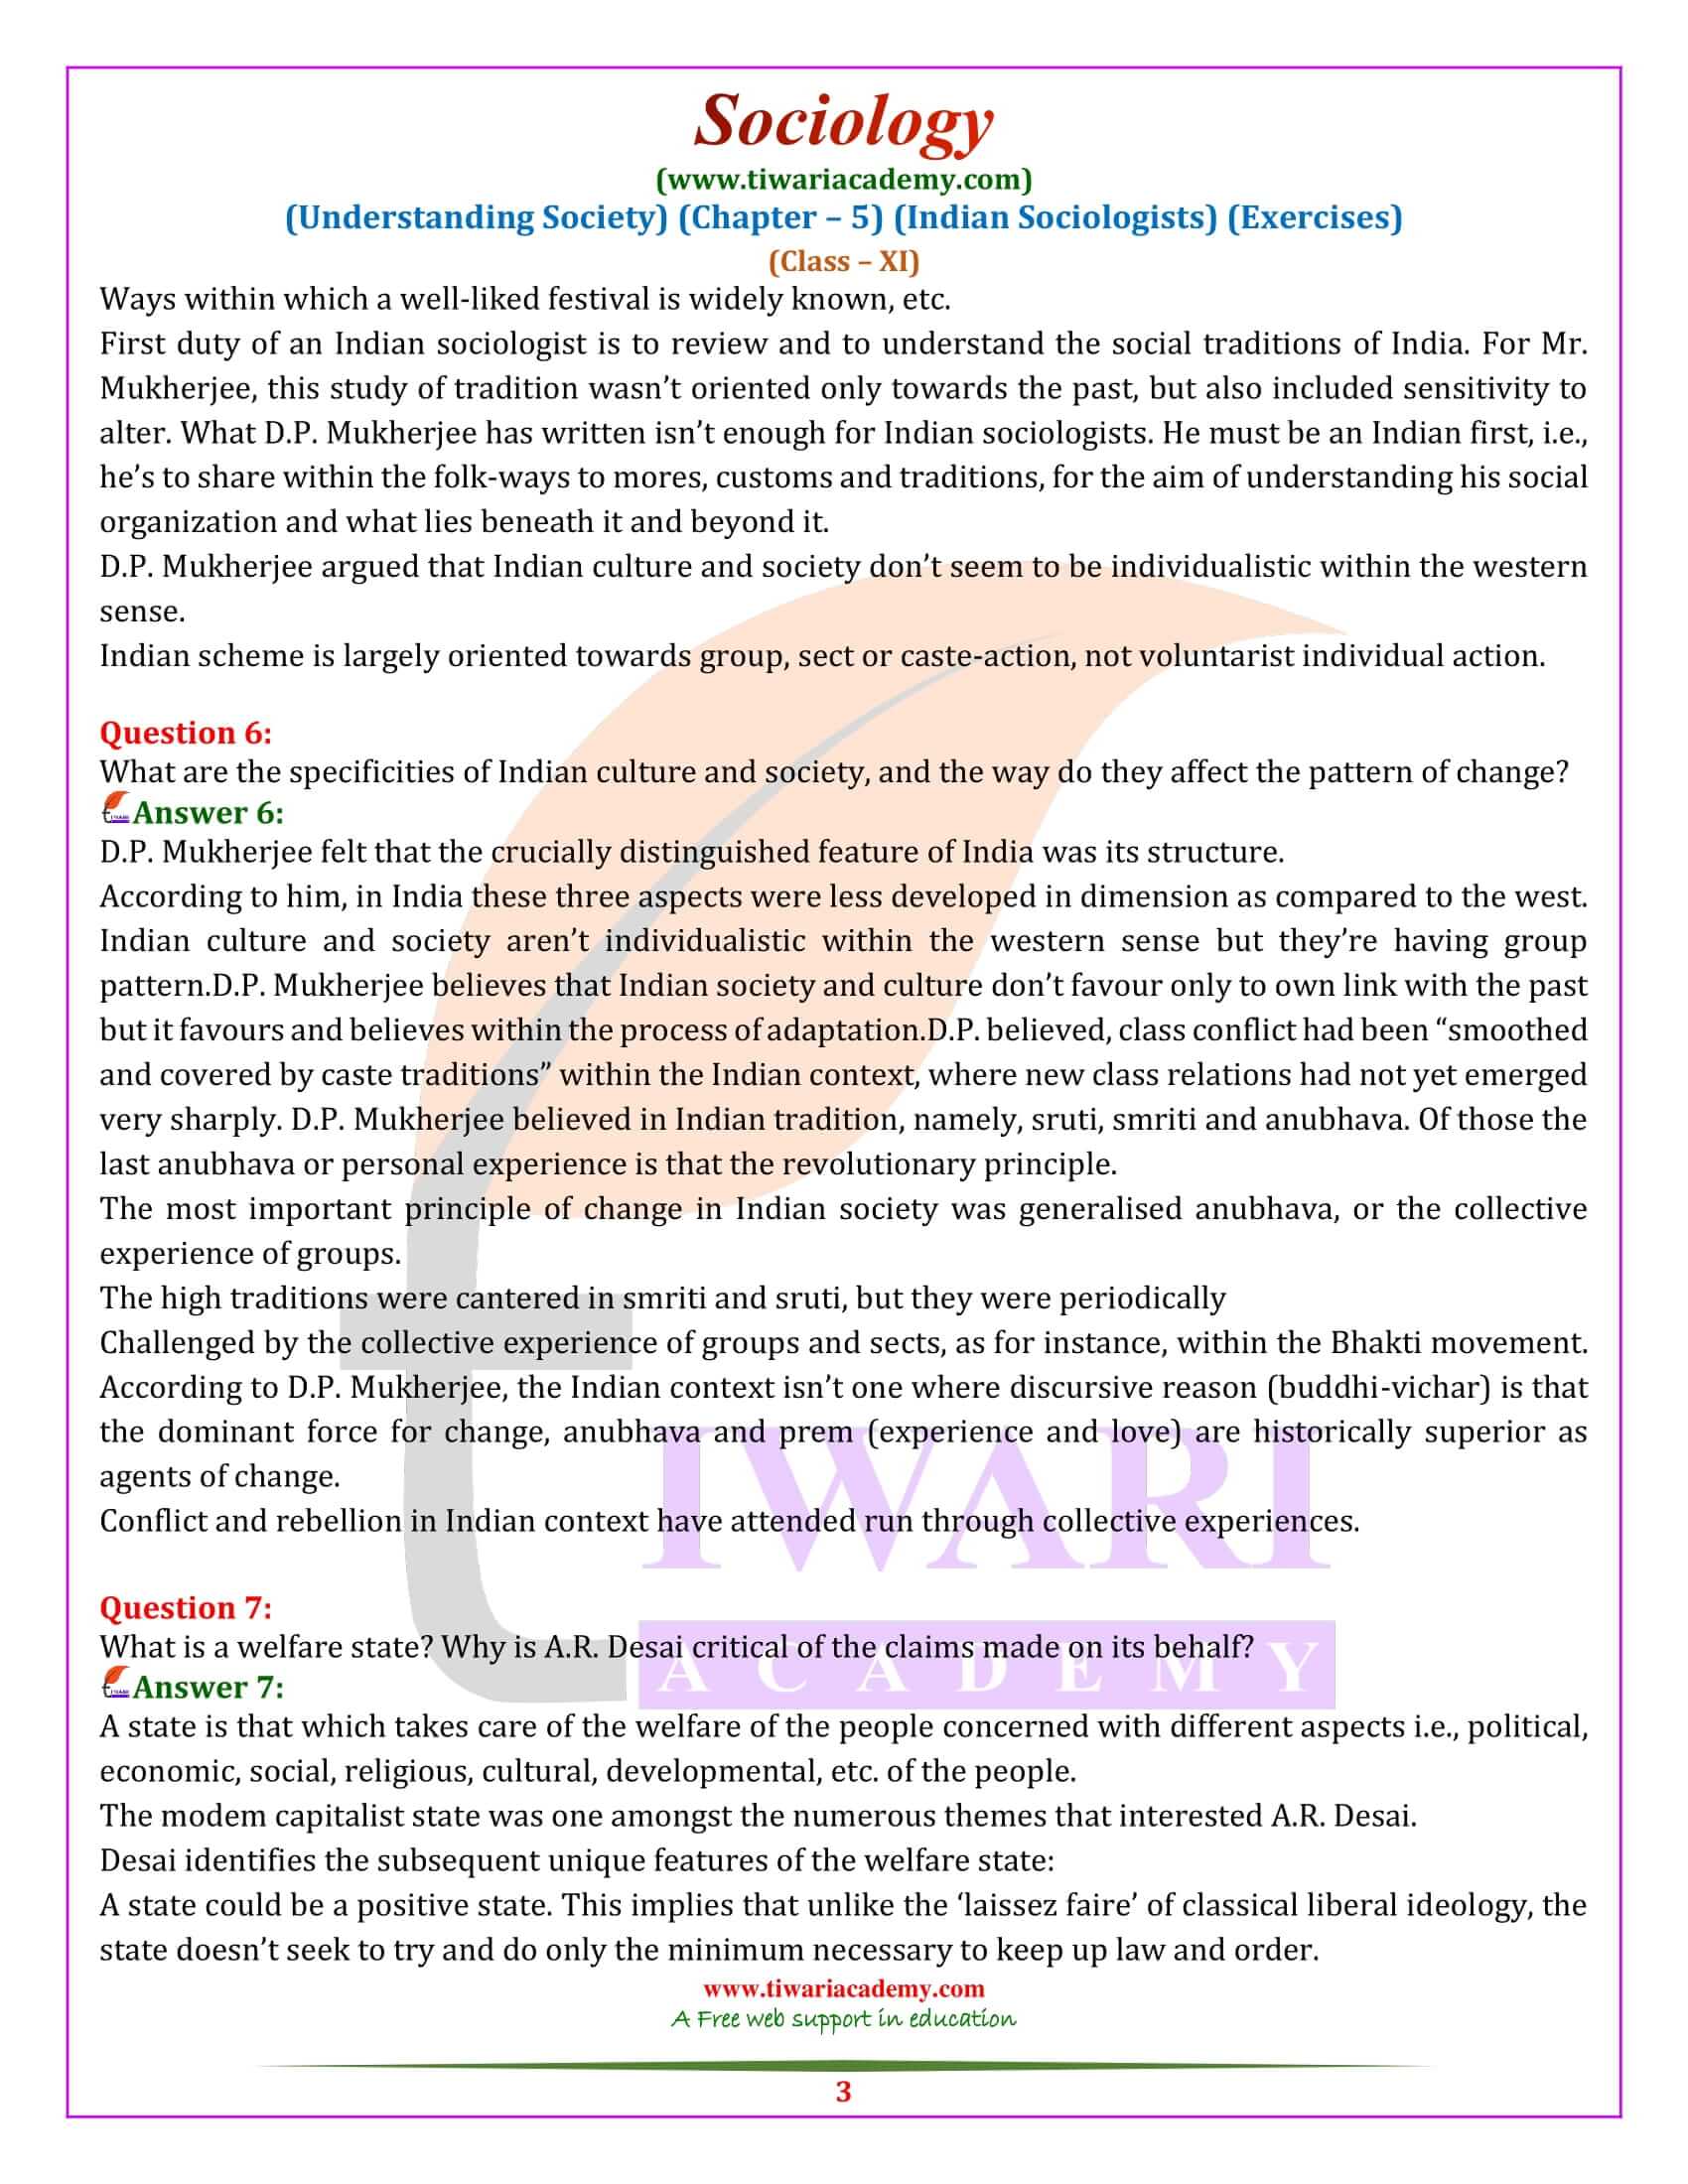 NCERT Solutions for Class 11 Sociology Chapter 5 in English Medium